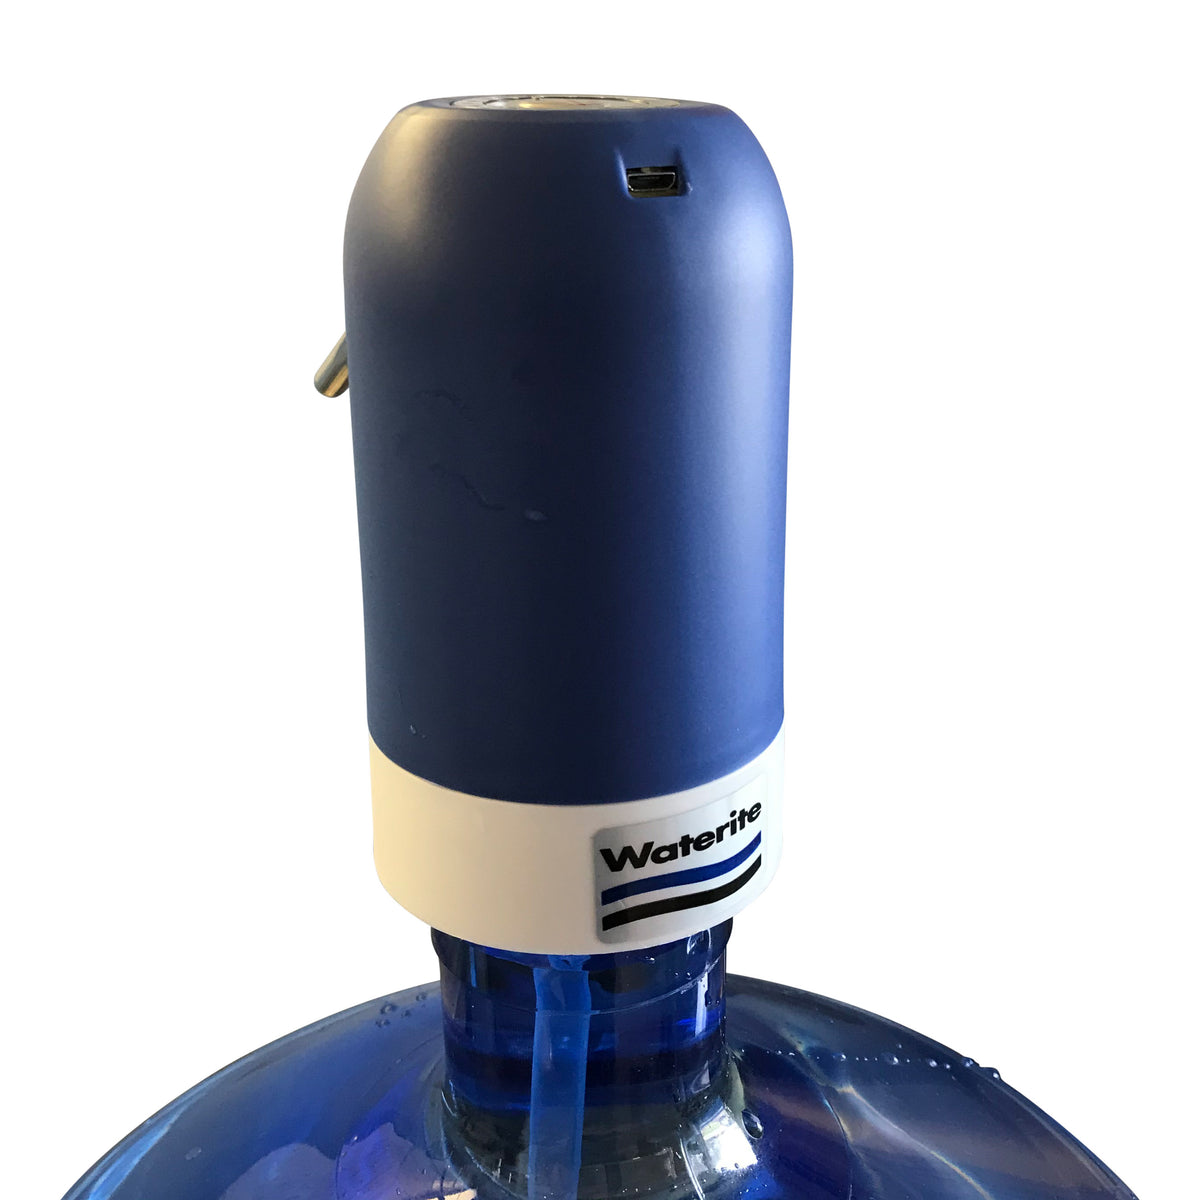 Genie Rechargeable Automatic Water Jug Pump from back